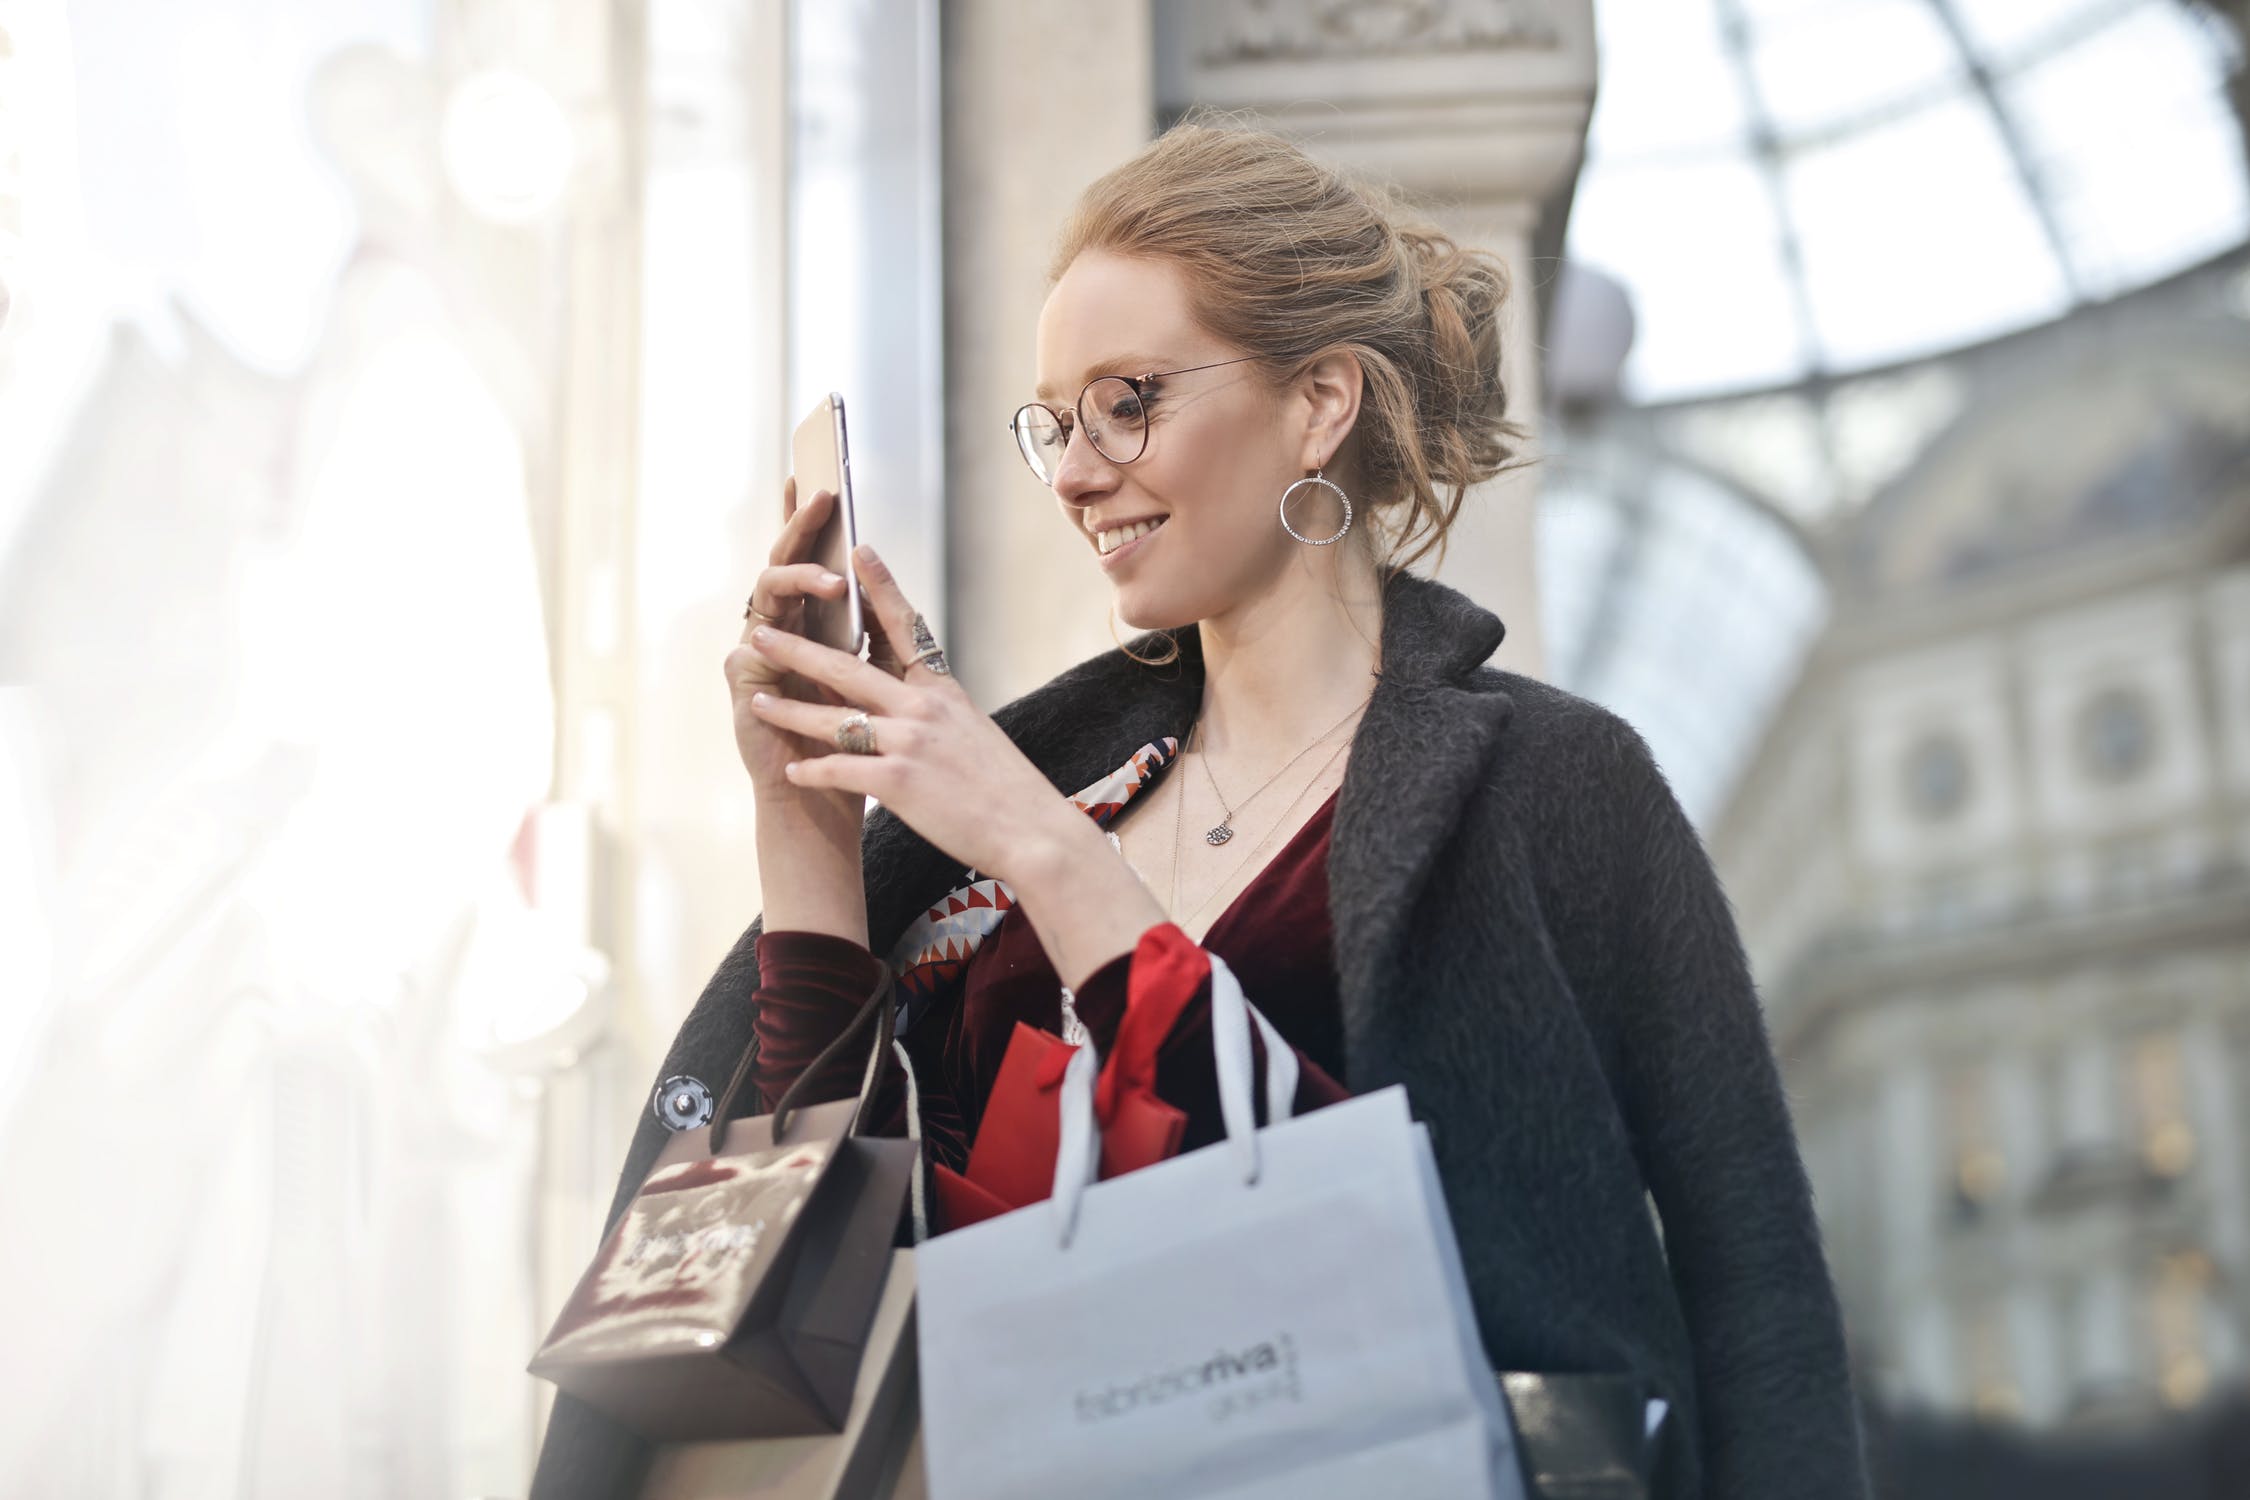 Woman shops in brick and mortar as well as through mobile apps.